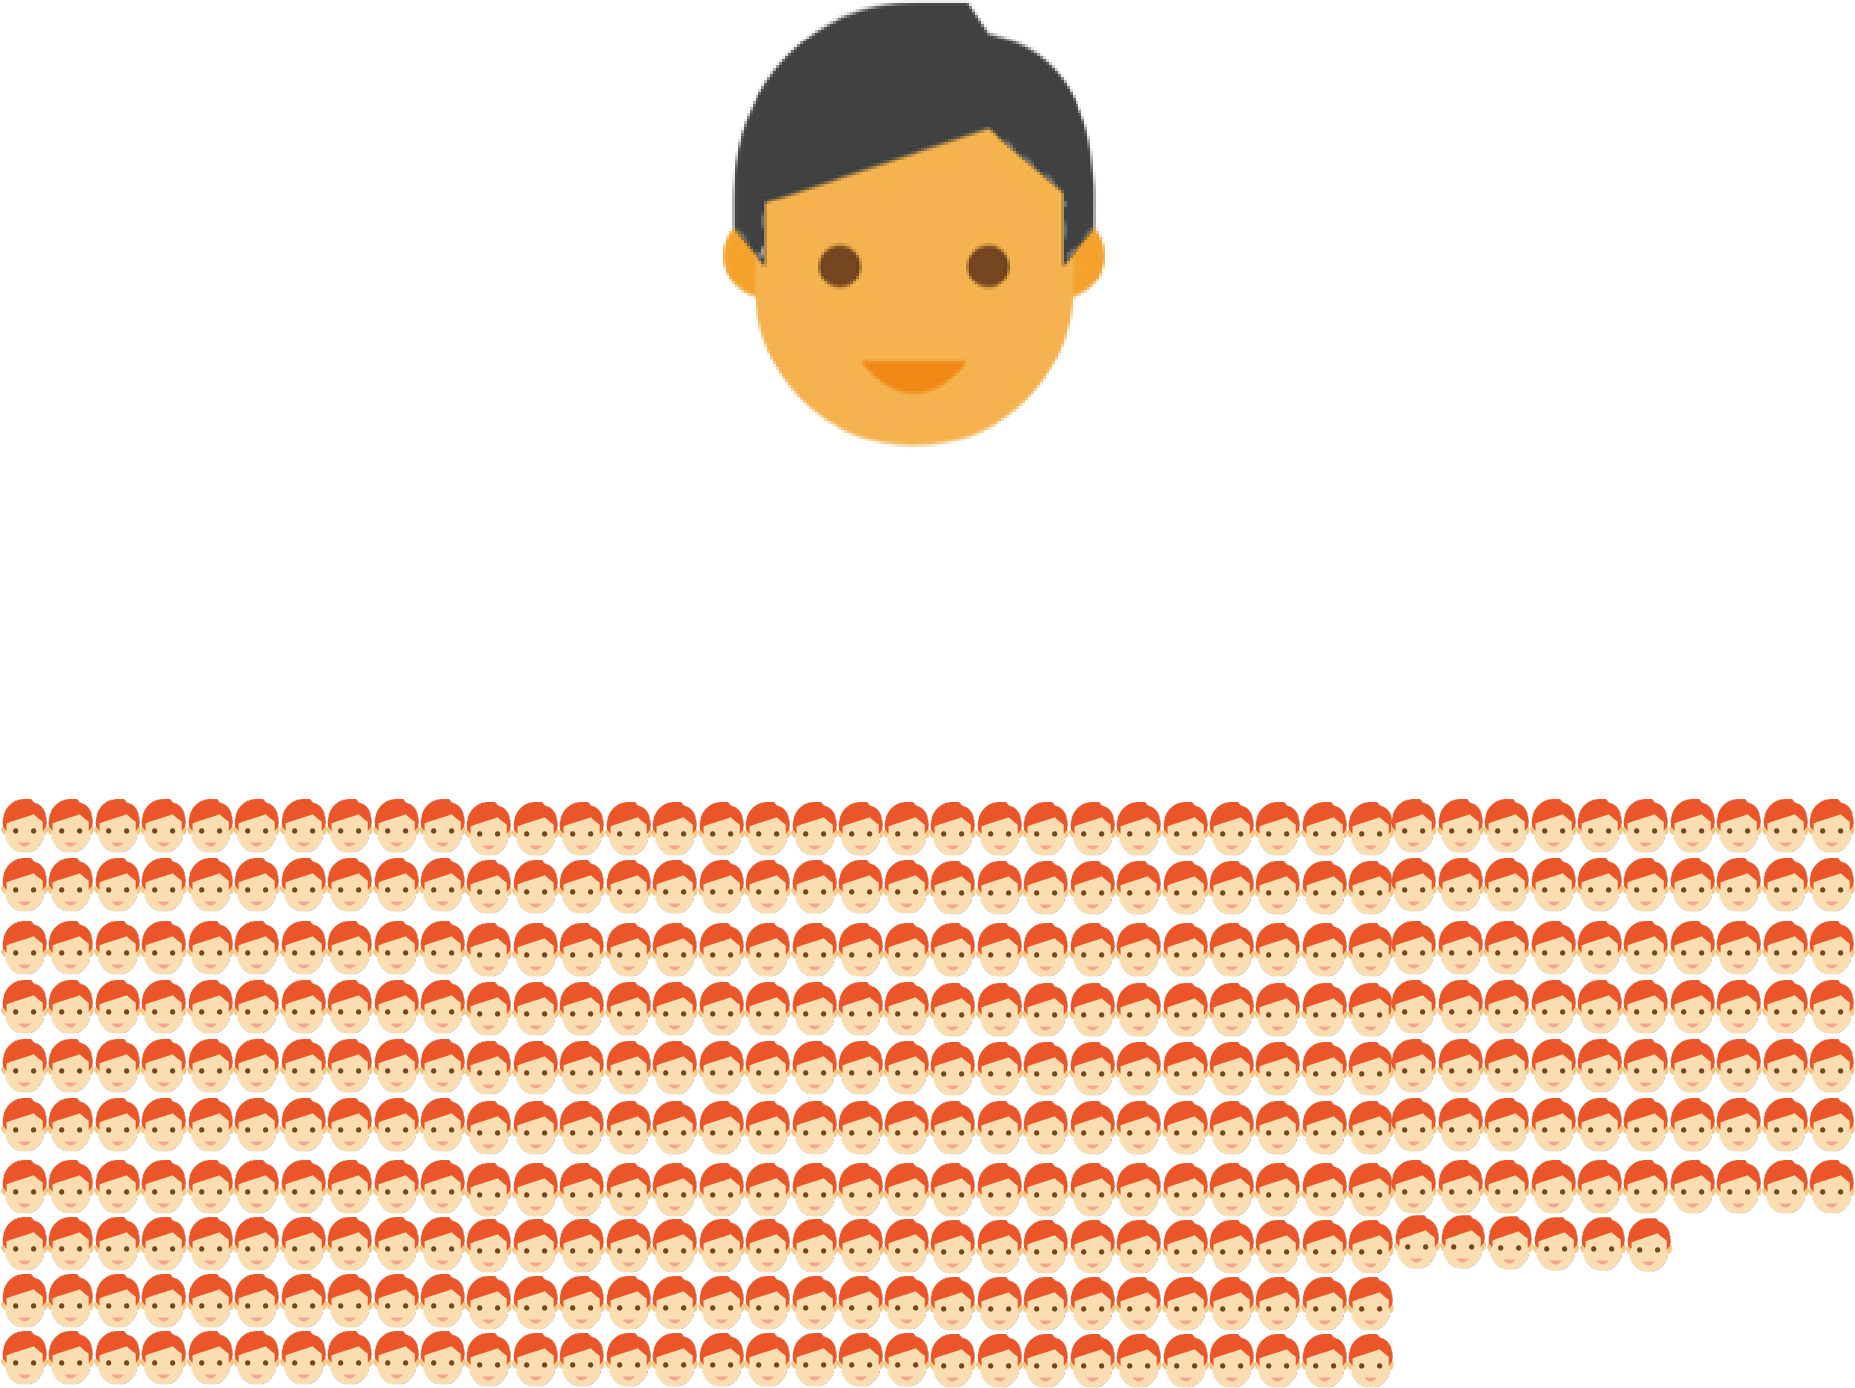 Ratio of social workers to students in Japan